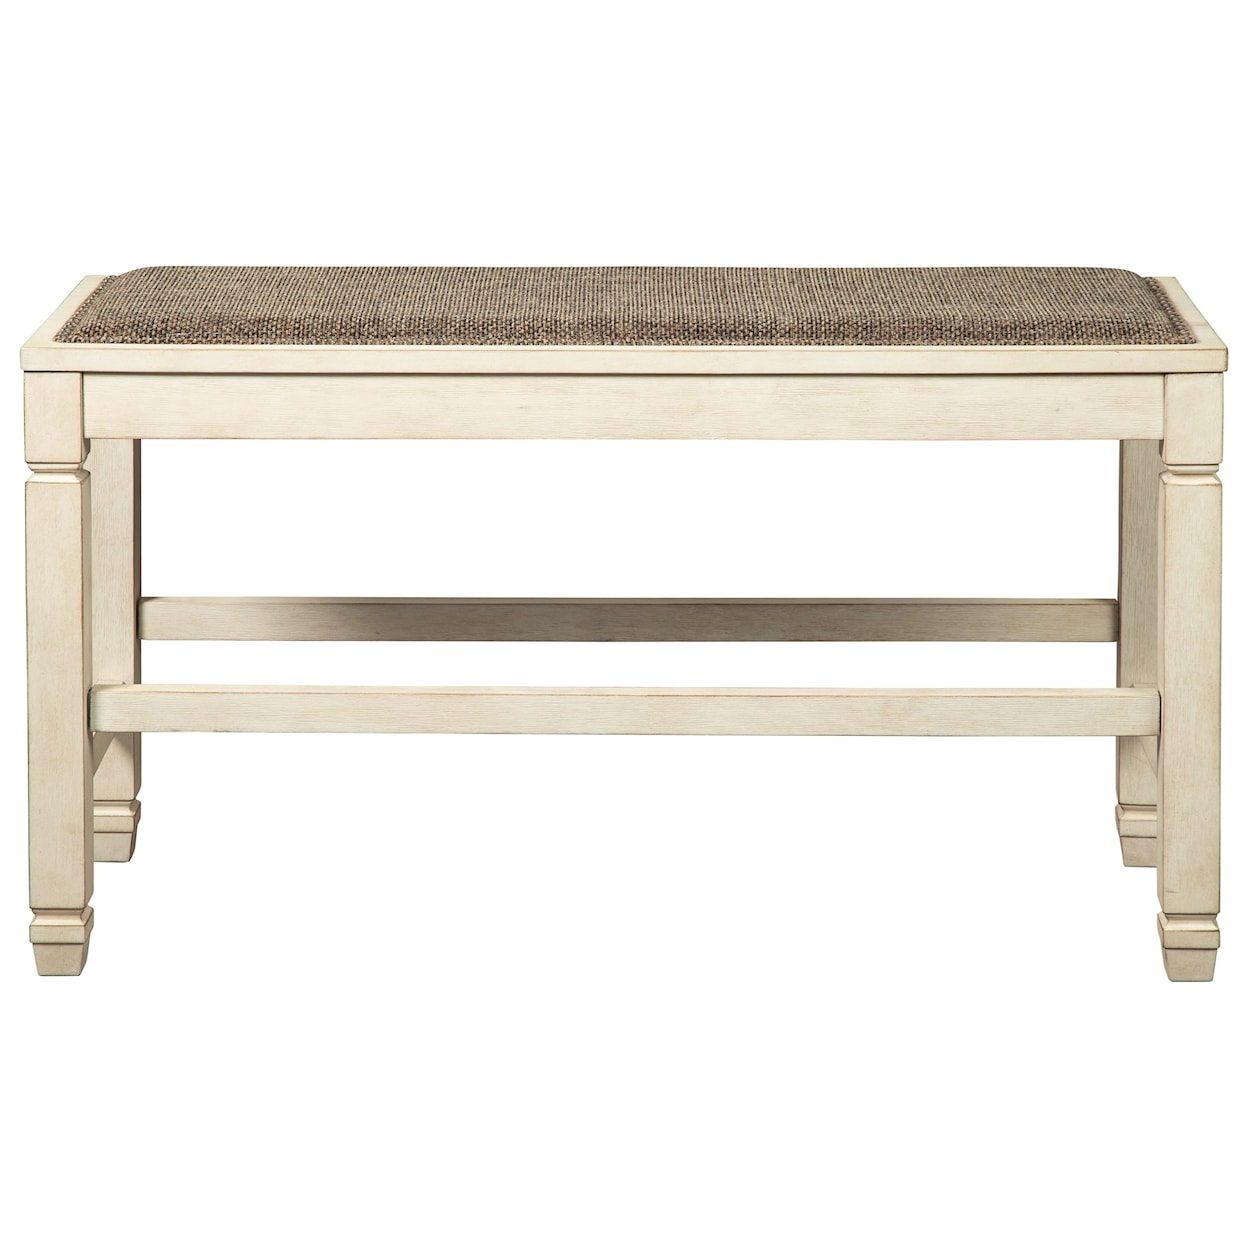 Signature Design by Ashley Bolanburg Double Counter Upholstered Bench